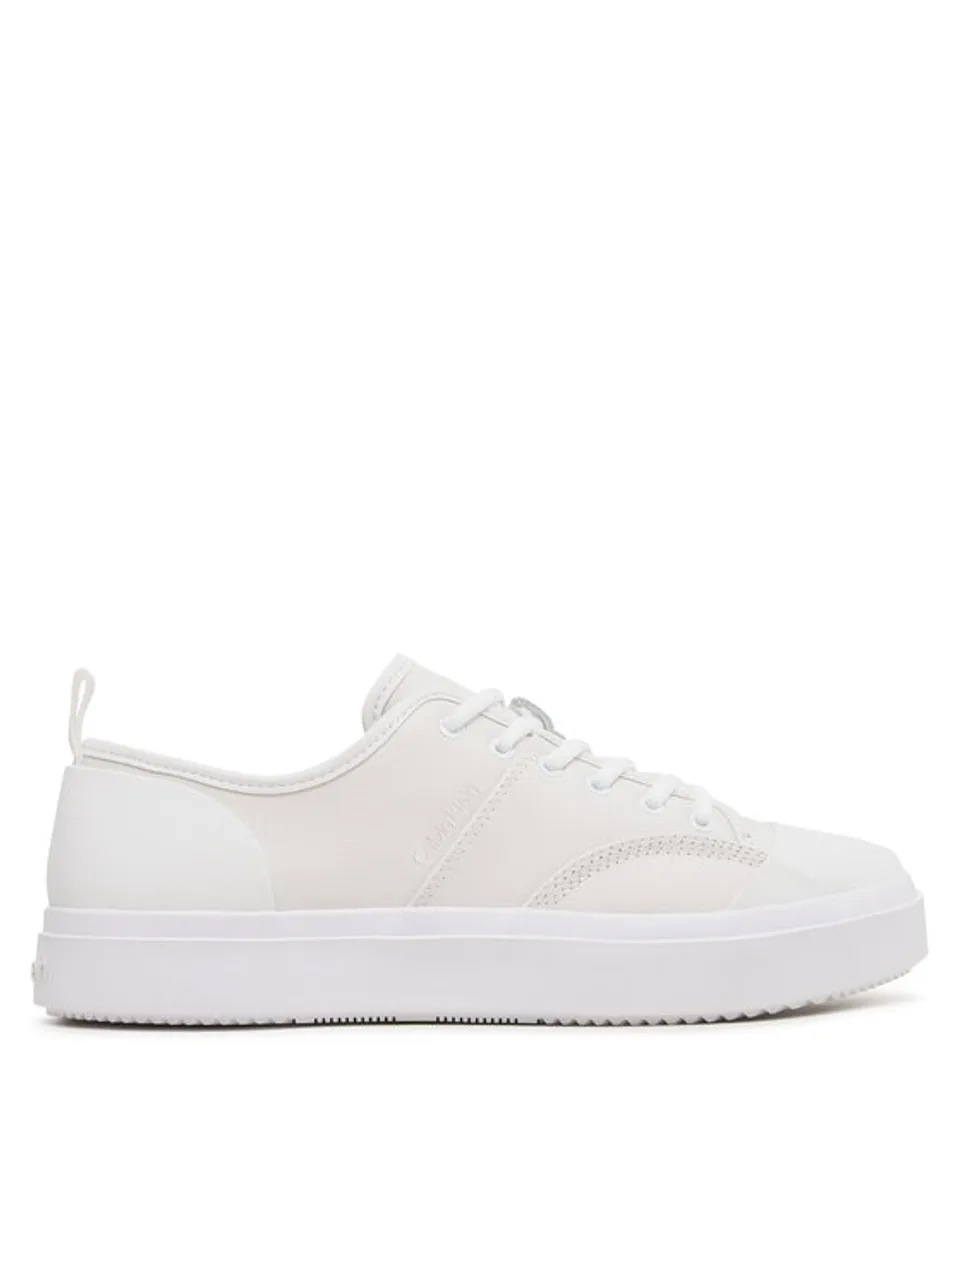 Calvin Klein Sneakers aus Stoff Low Top Lace Up Lth HM0HM01045 Weiß